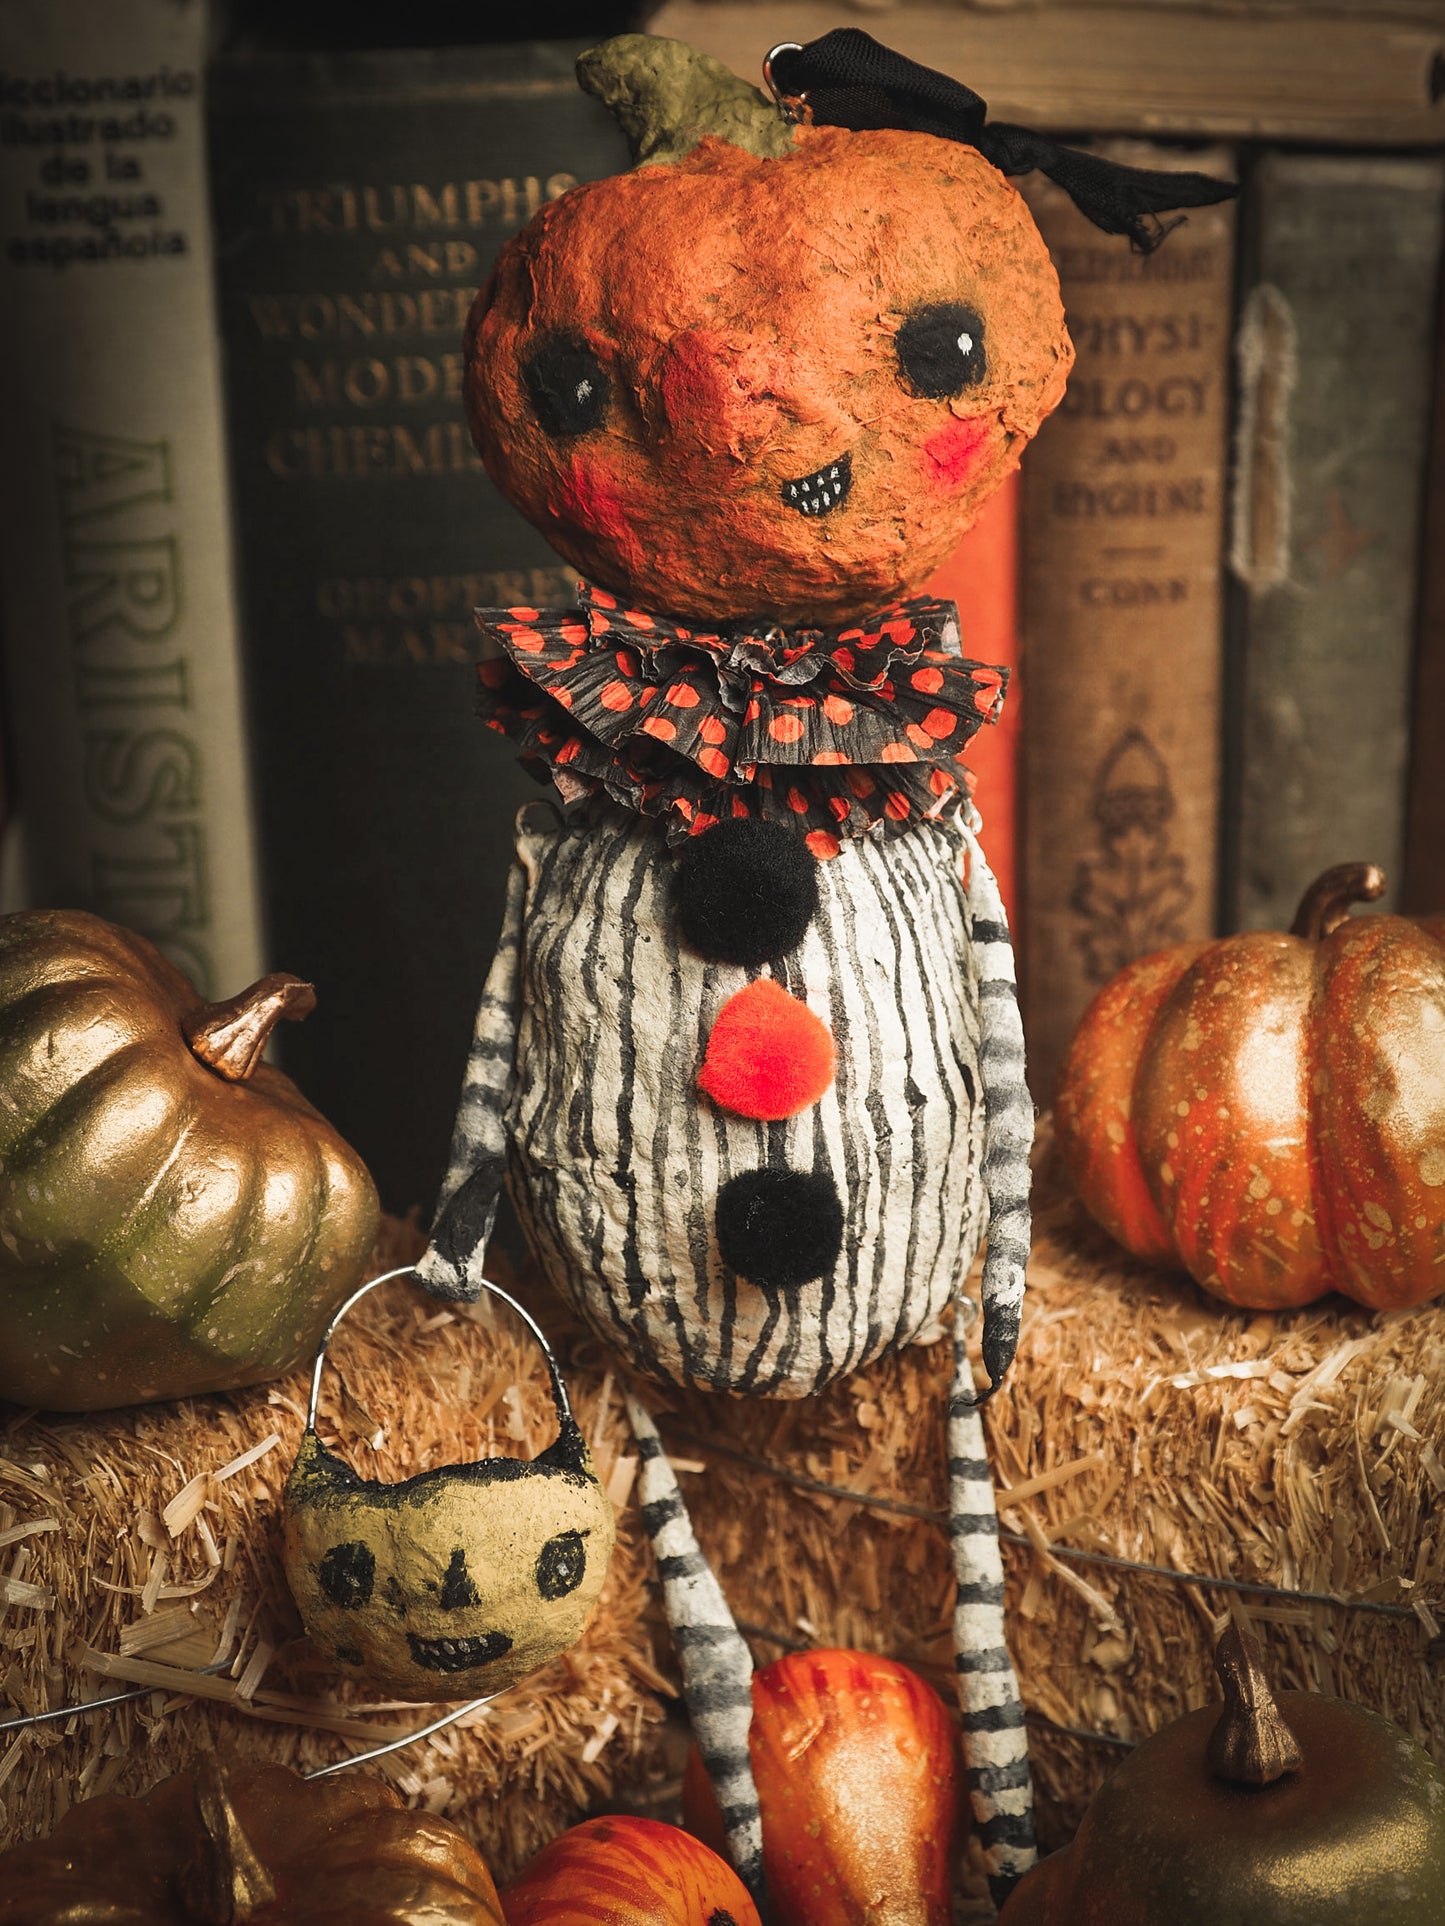 This adorable Halloween handmade ornament pumpkin jack-o-lantern doll monster by Idania Salcido, the artist behind Danita Art, is made with painted spun cotton and paper. It has hand painted face, teeth and eyes with a glittery paper had and matching paper costume. A Halloween home decoration on trick-or-treat night.